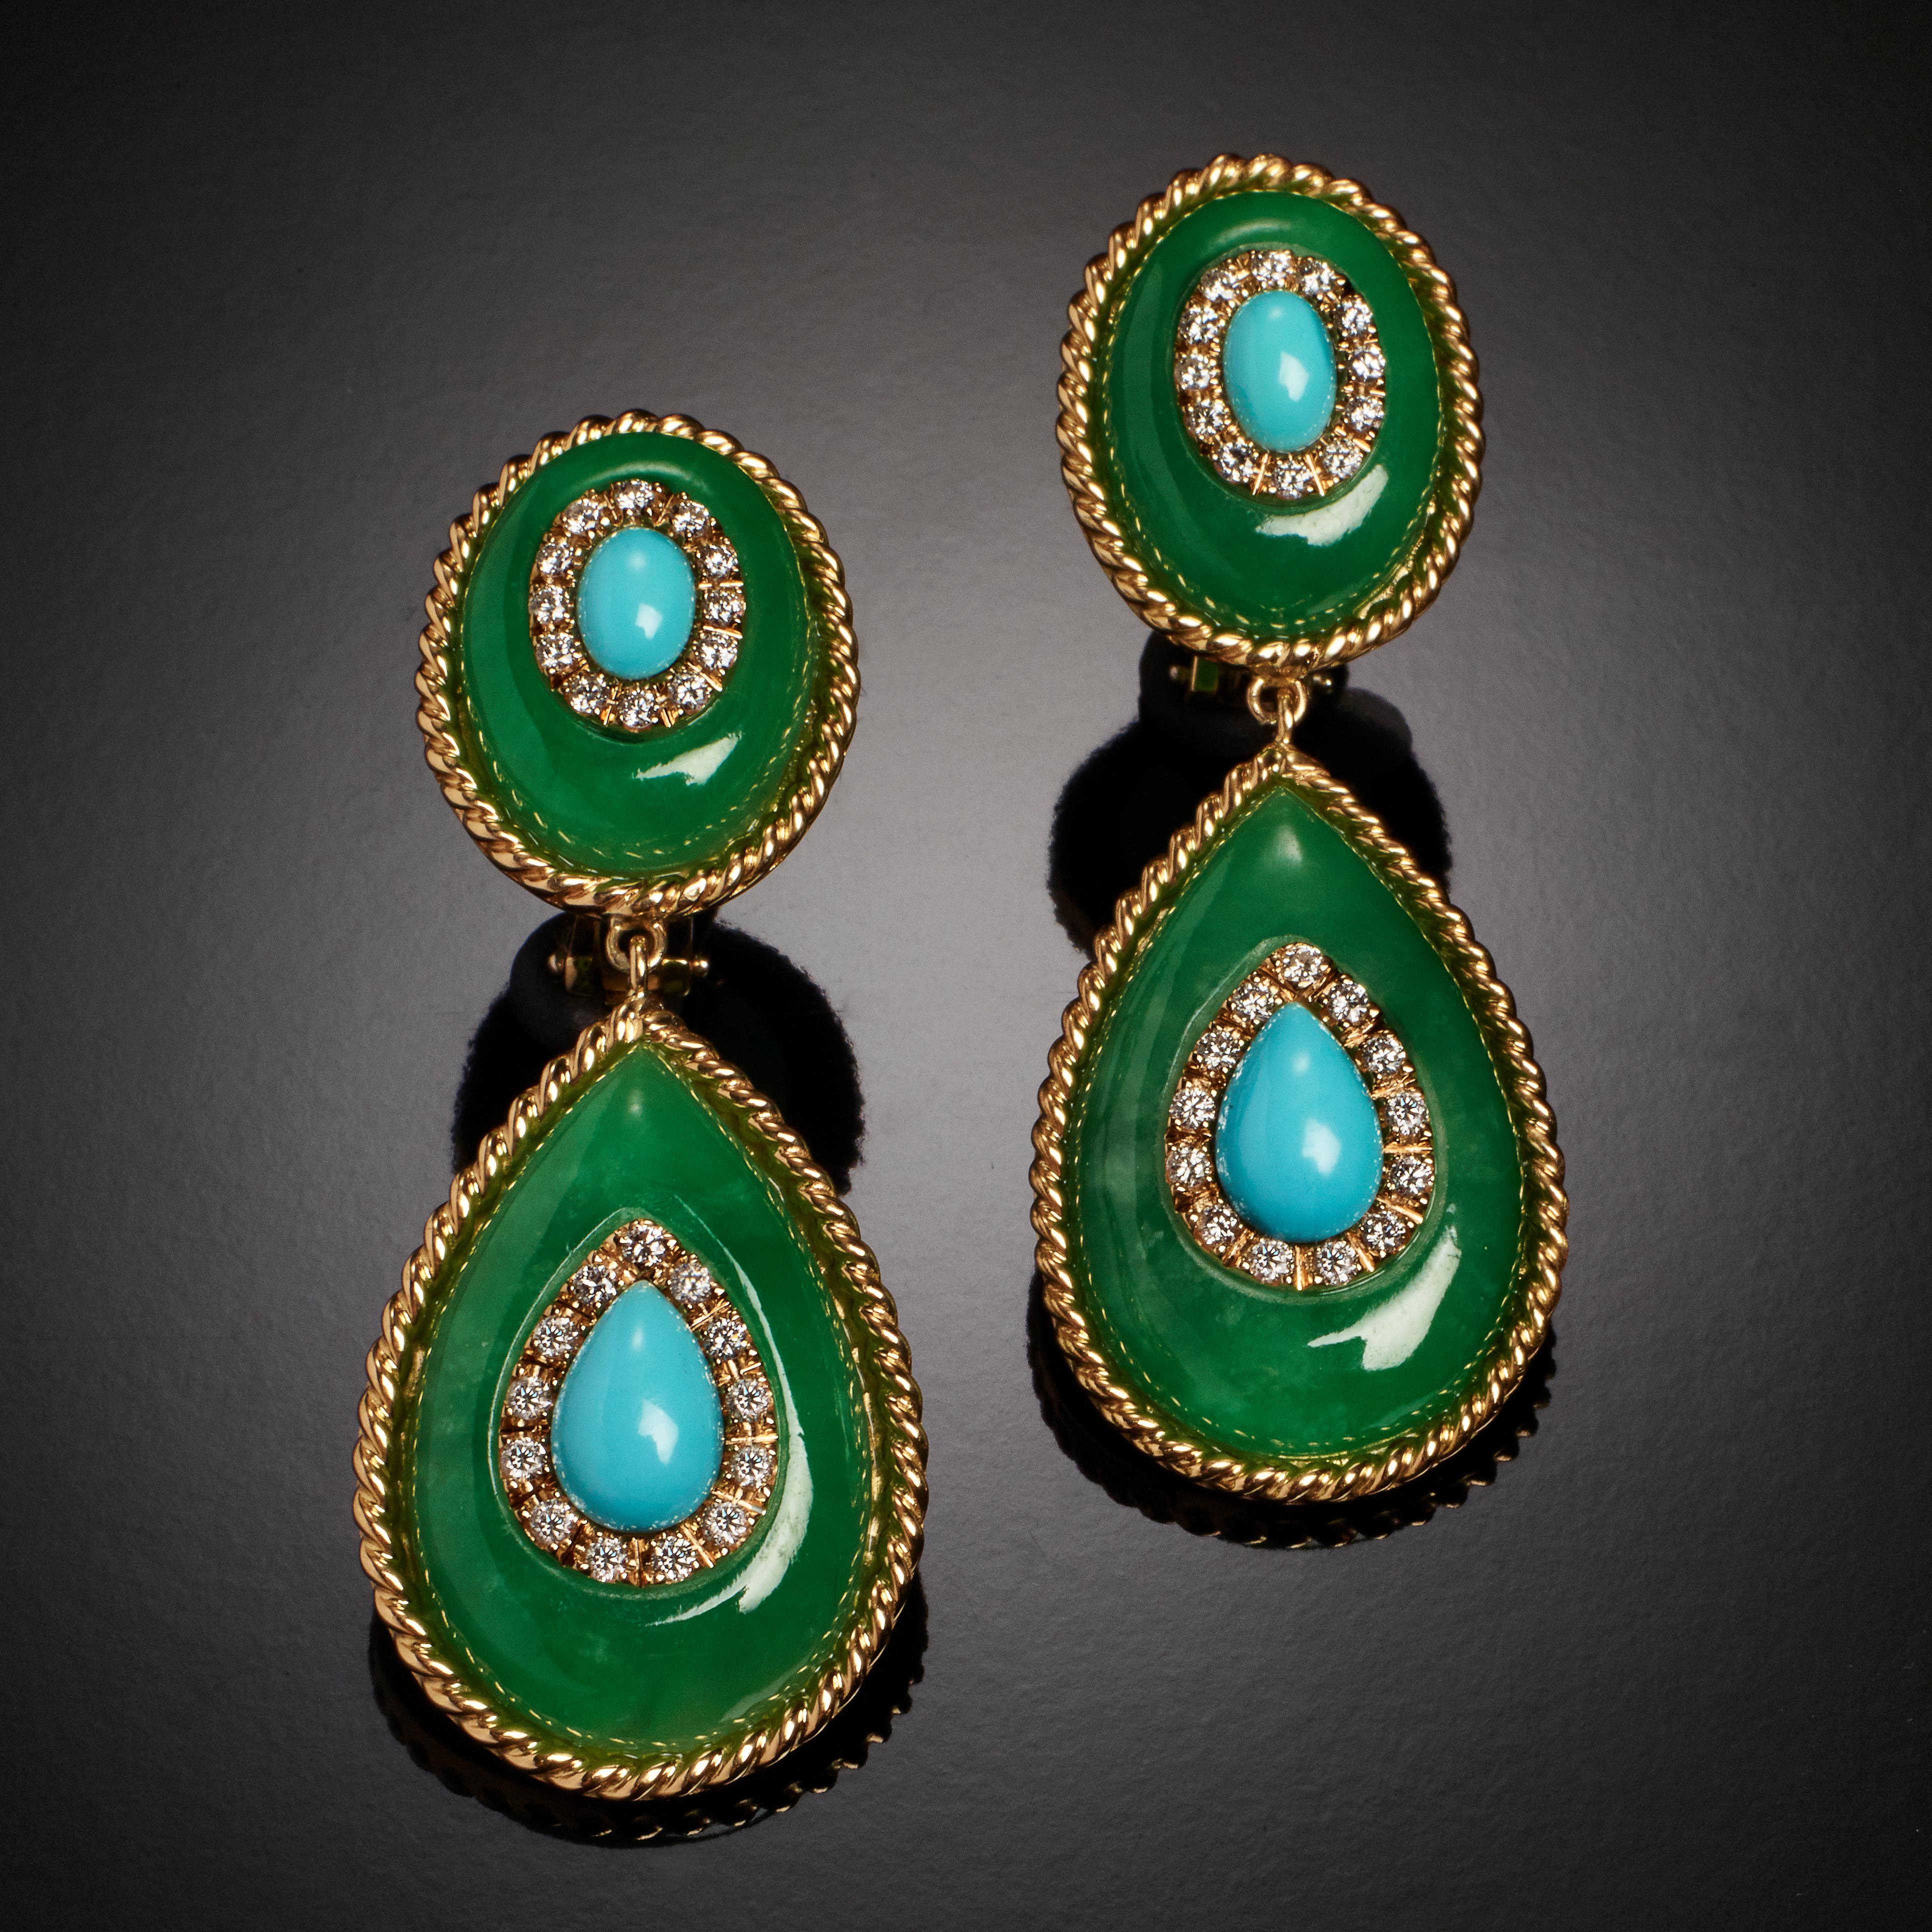 Contemporary Veschetti 18 Kt Yellow Gold, Turquoises, Jades Inlay and Diamond Earrings For Sale